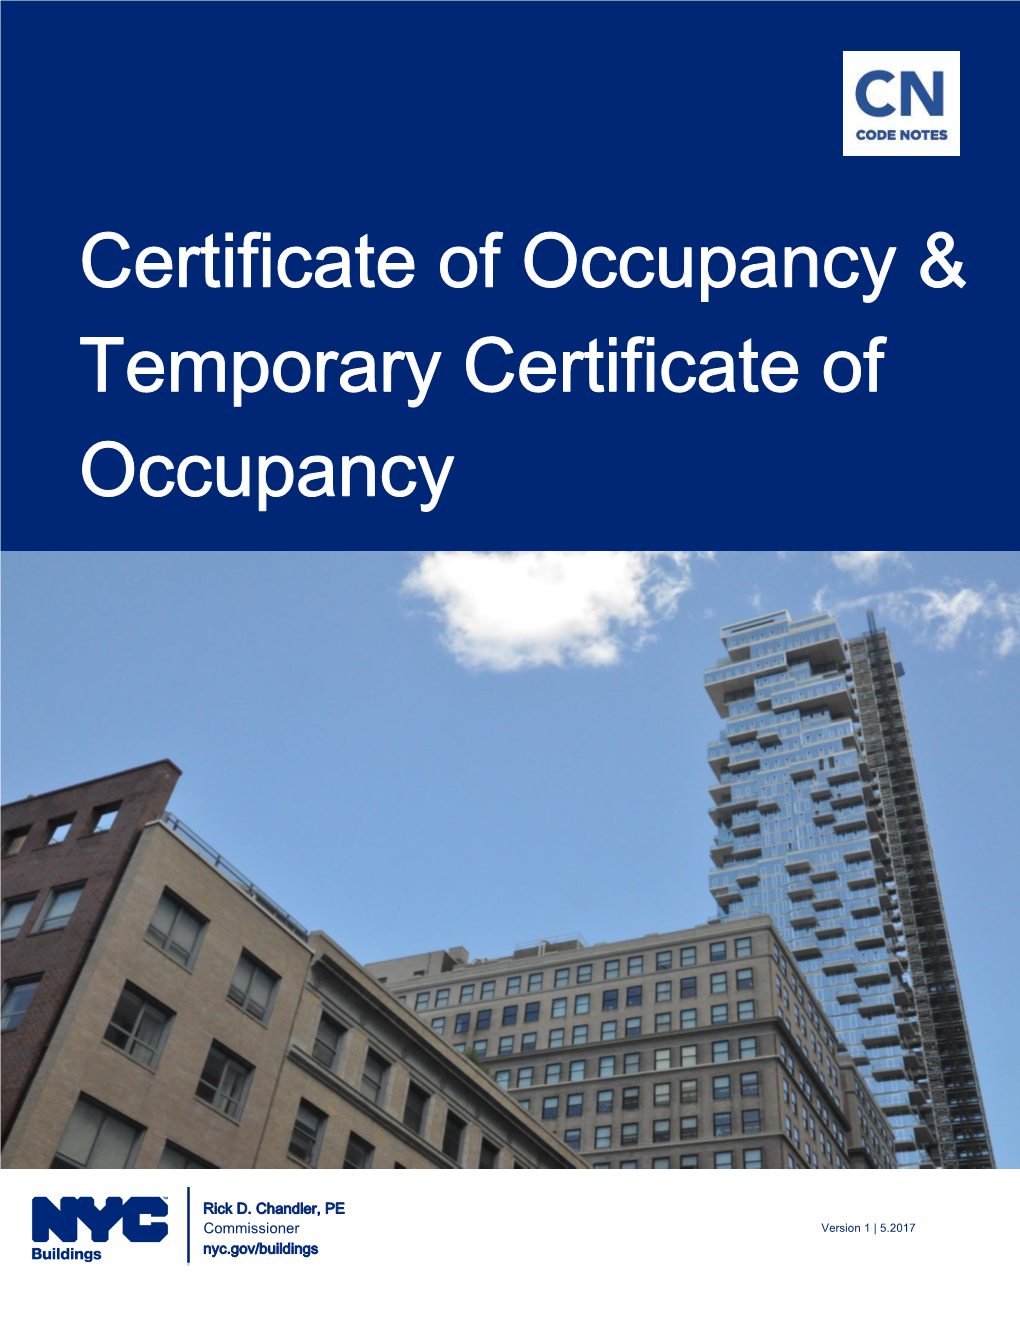 Code Notes: Certificate of Occupancy & Temporary Certificate of Occupancy